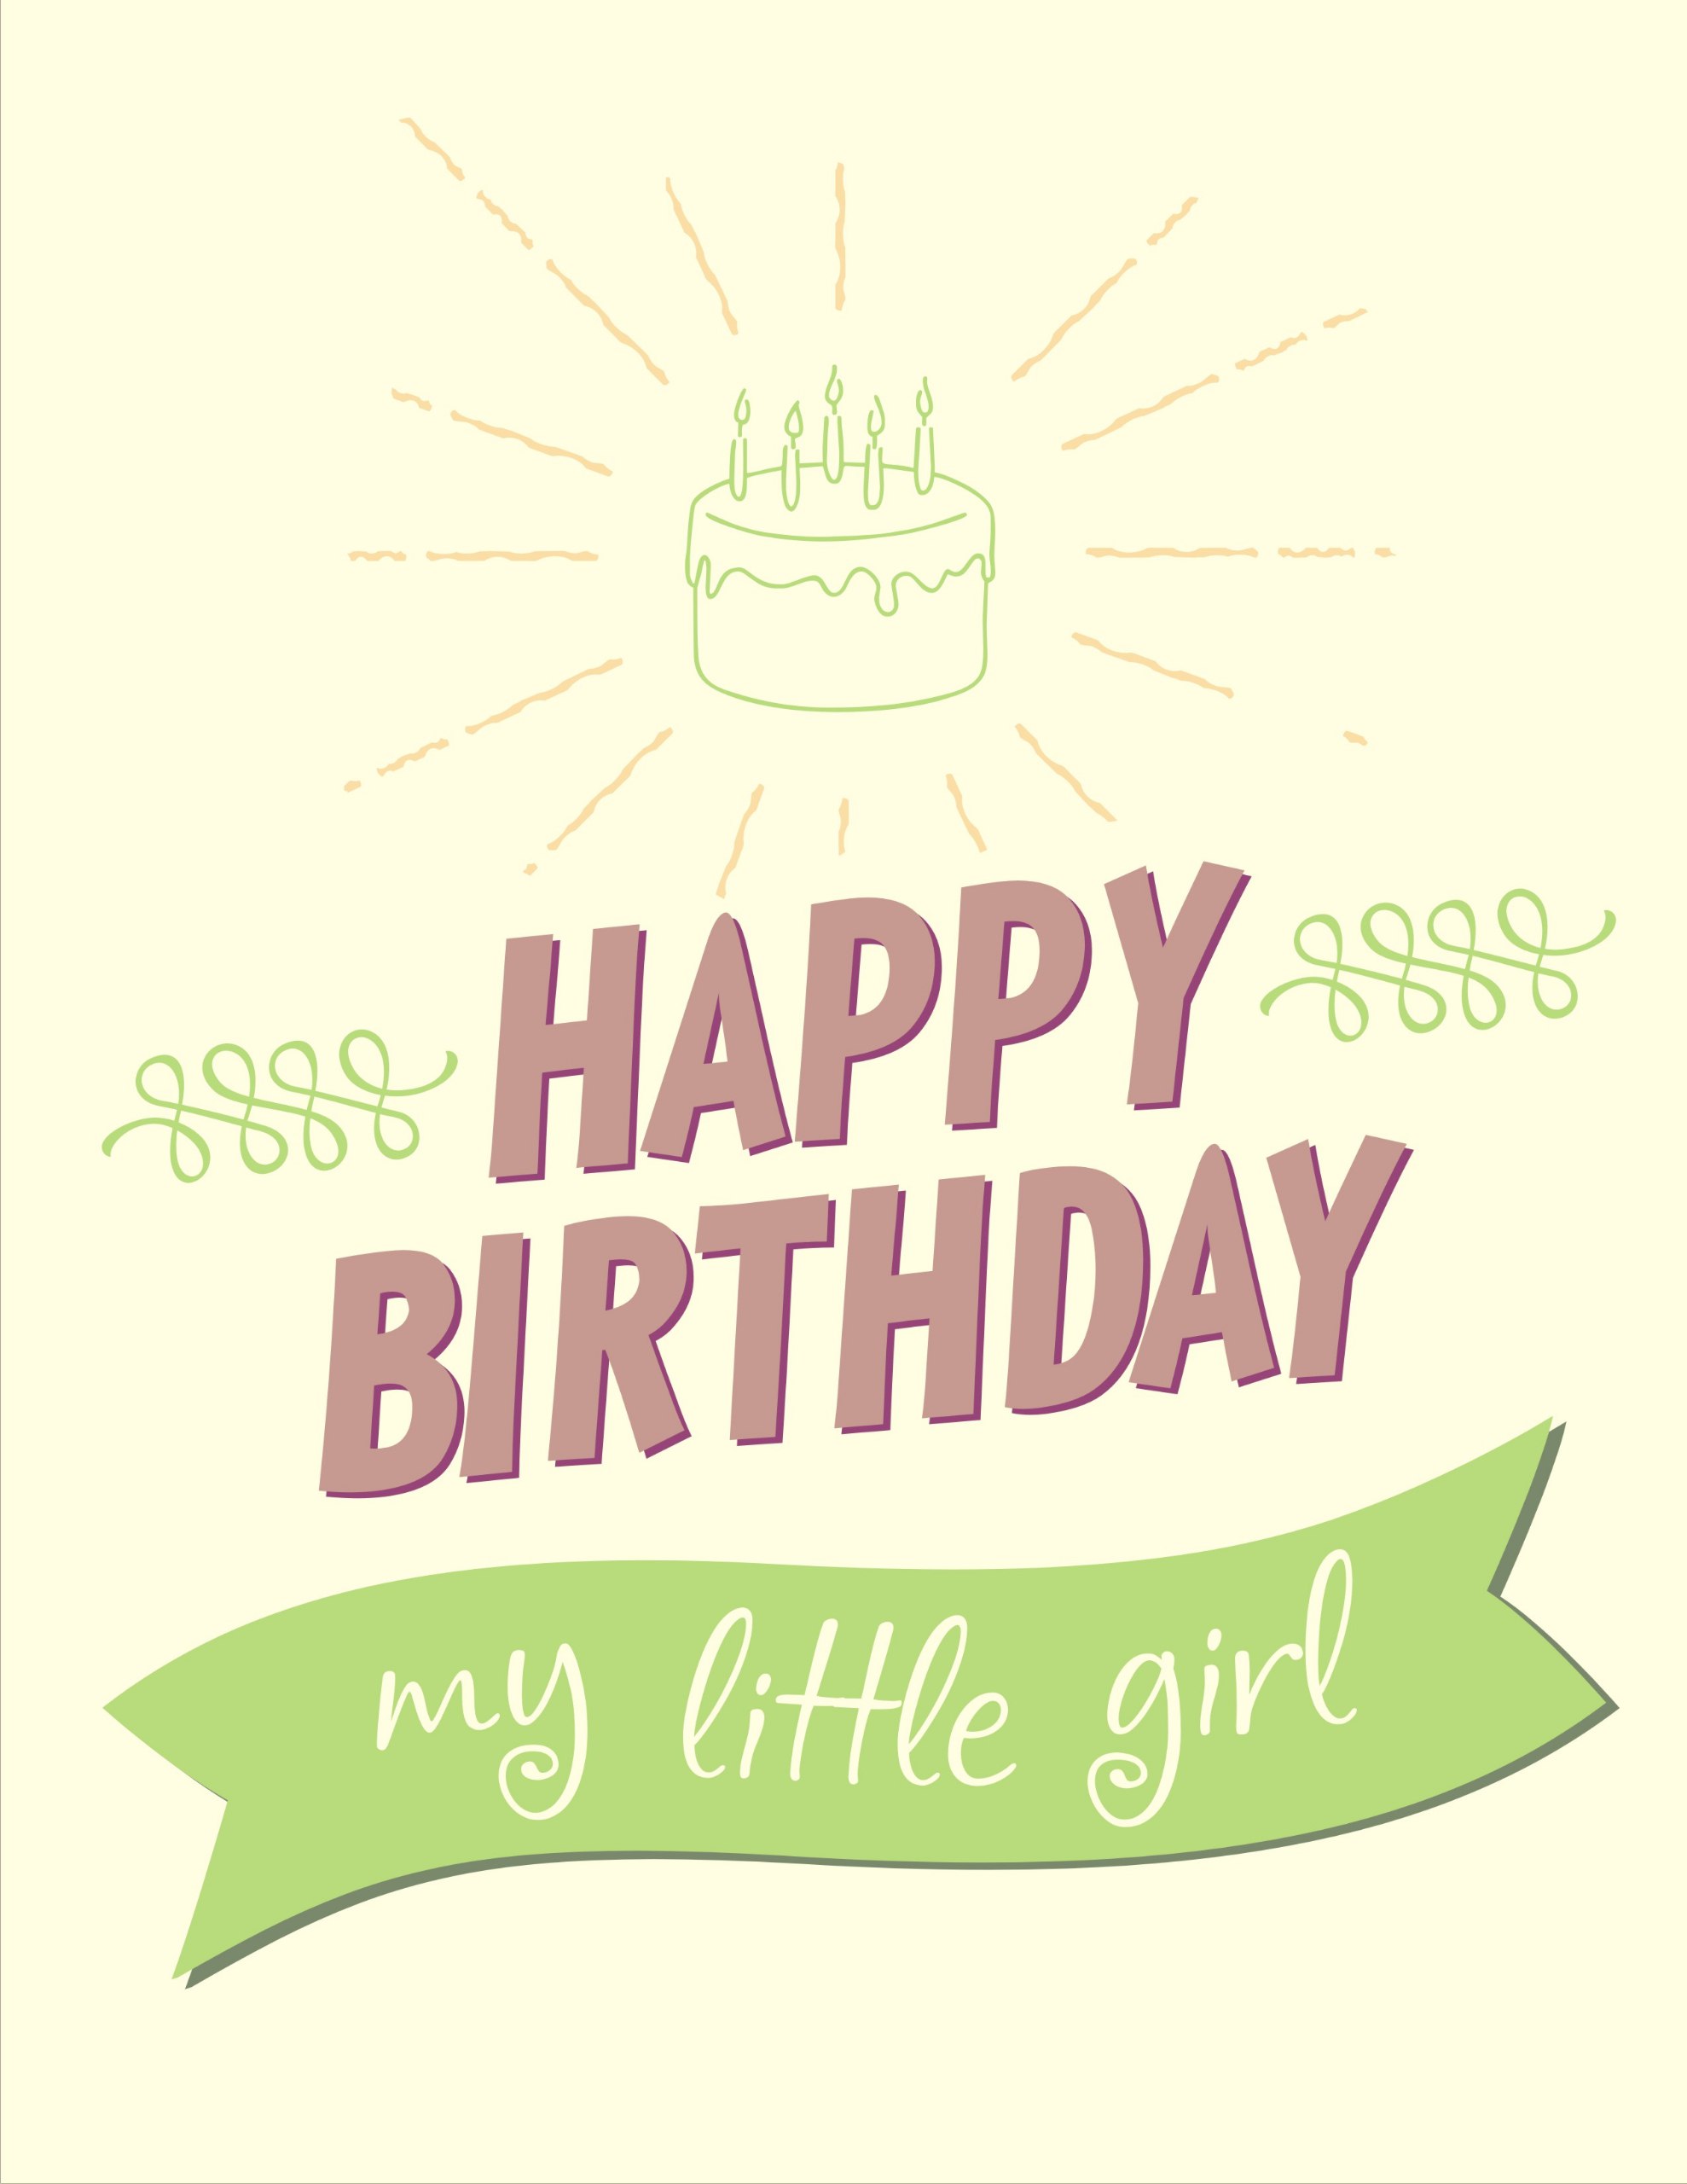 Free Free Happy Birthday Wishes and Images for Girl - birthdayimg.com